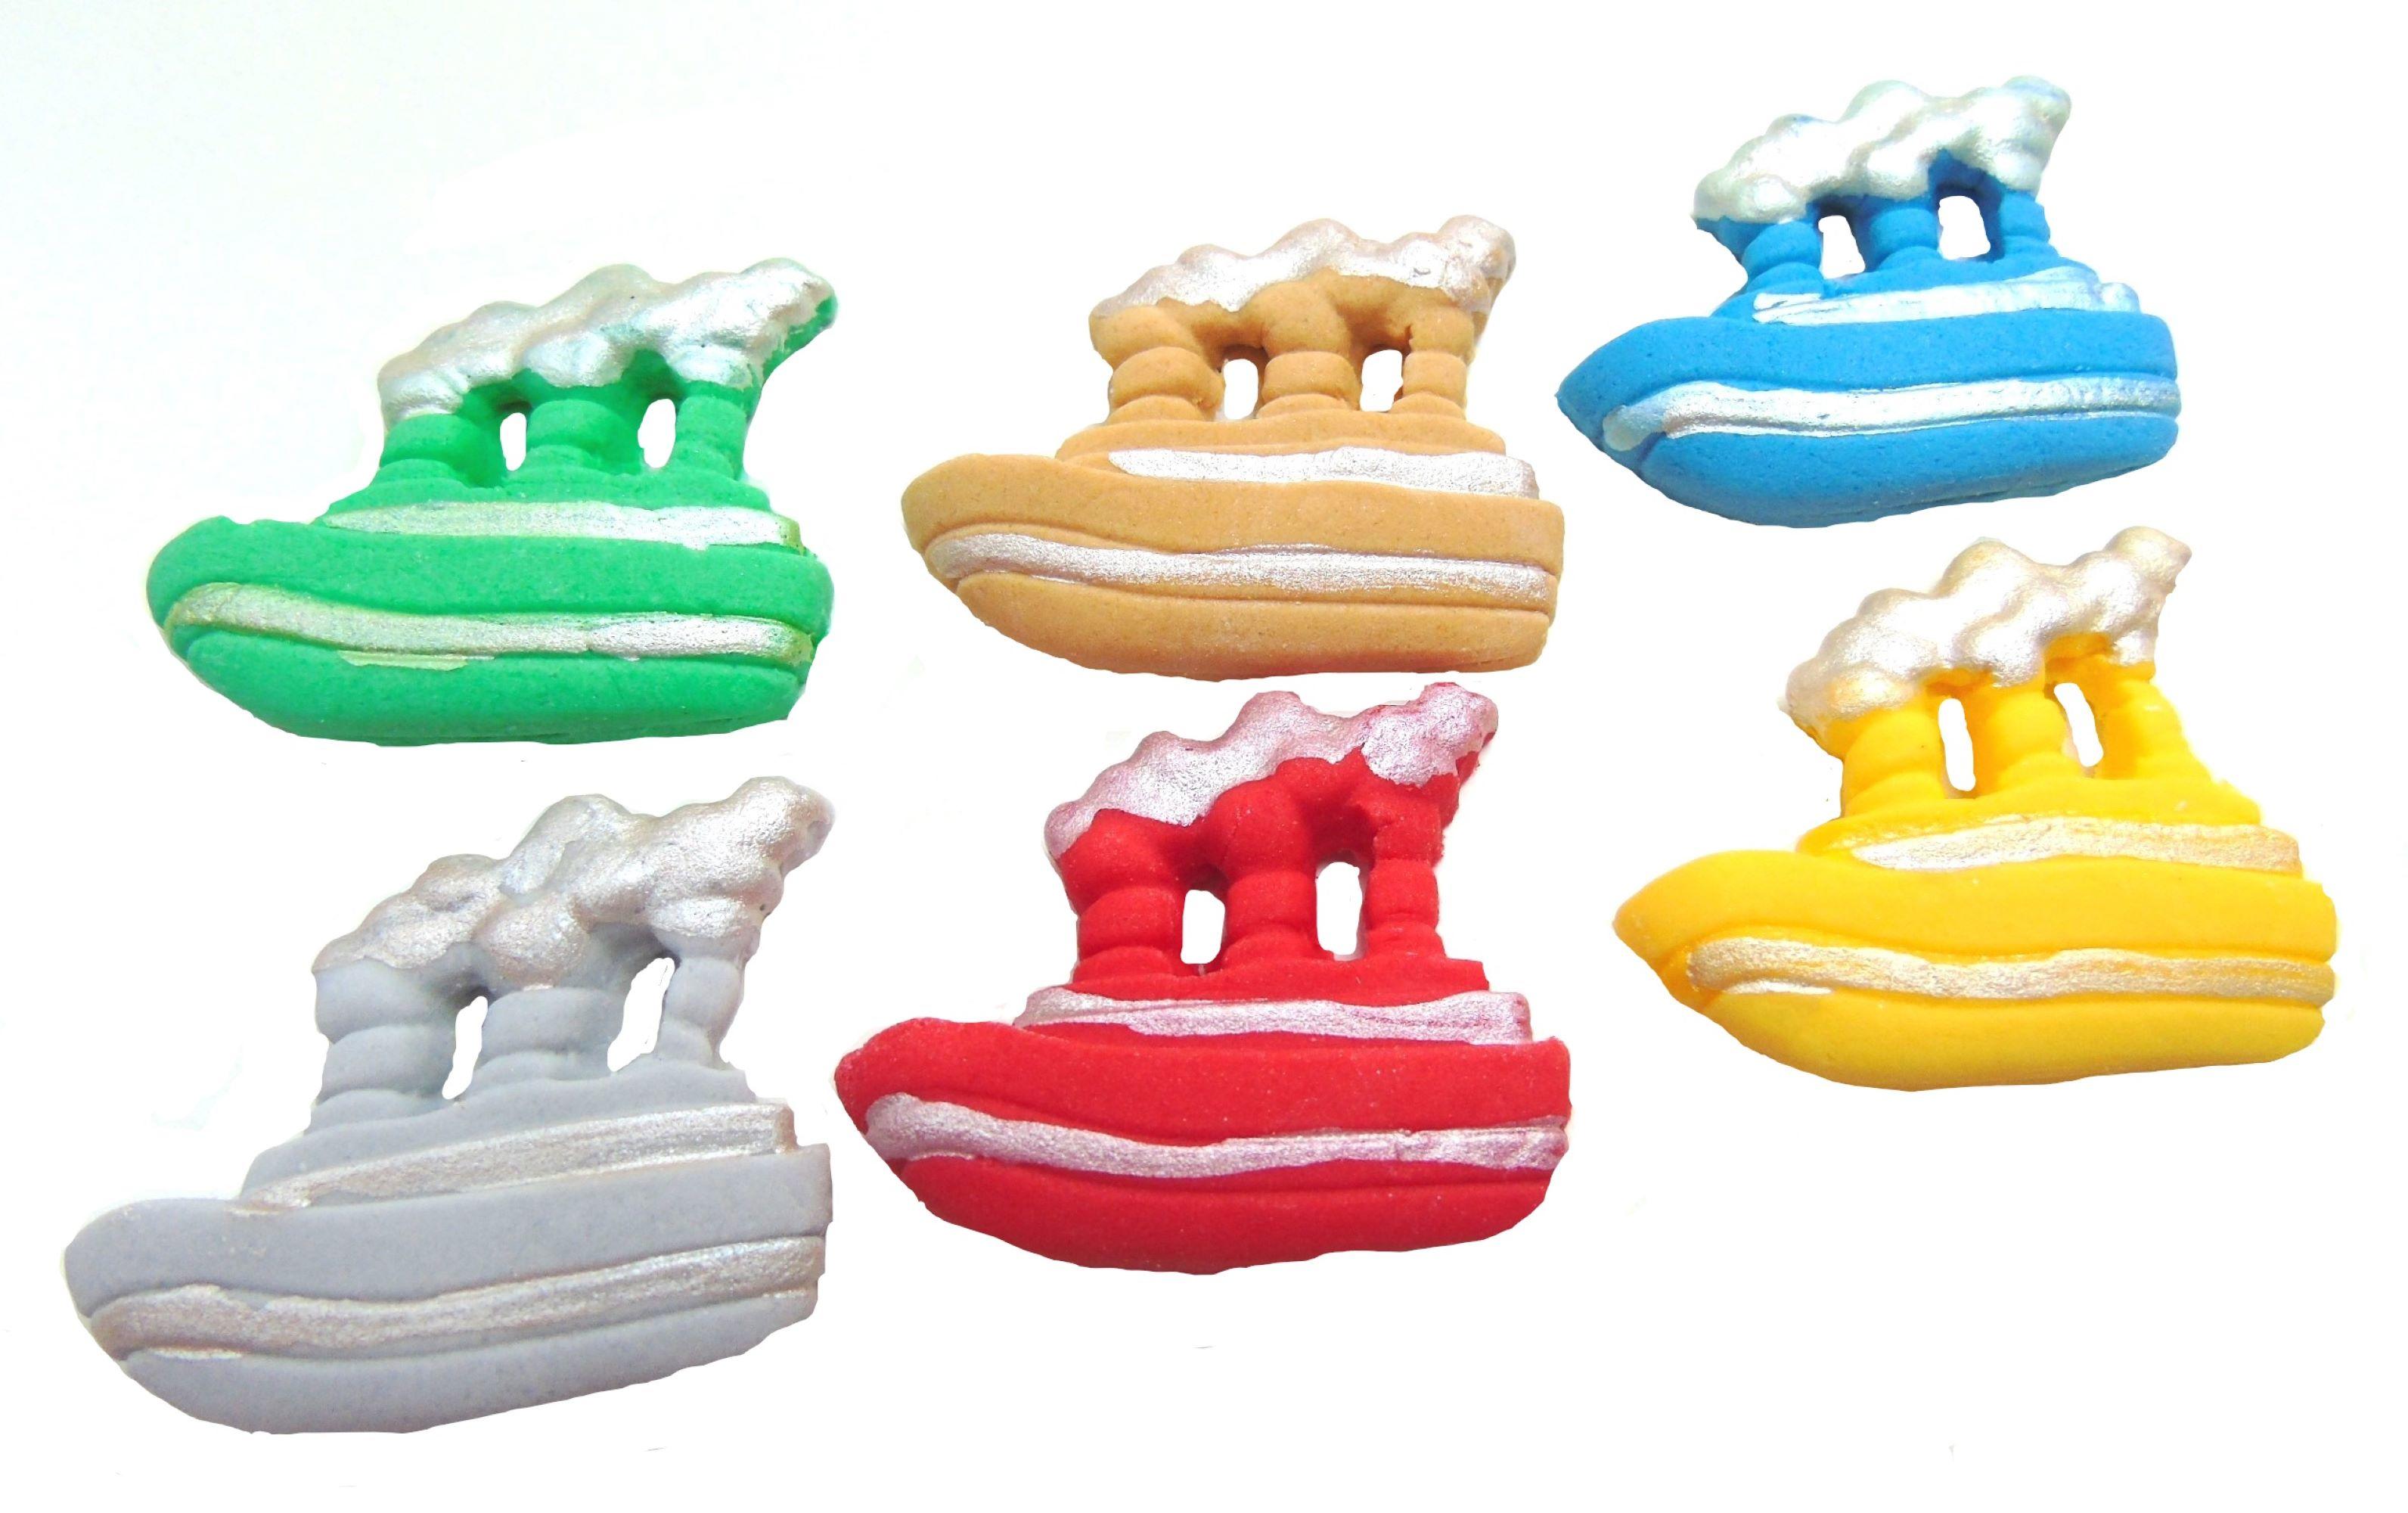 12 Novelty edible boats cupcake and cake toppers